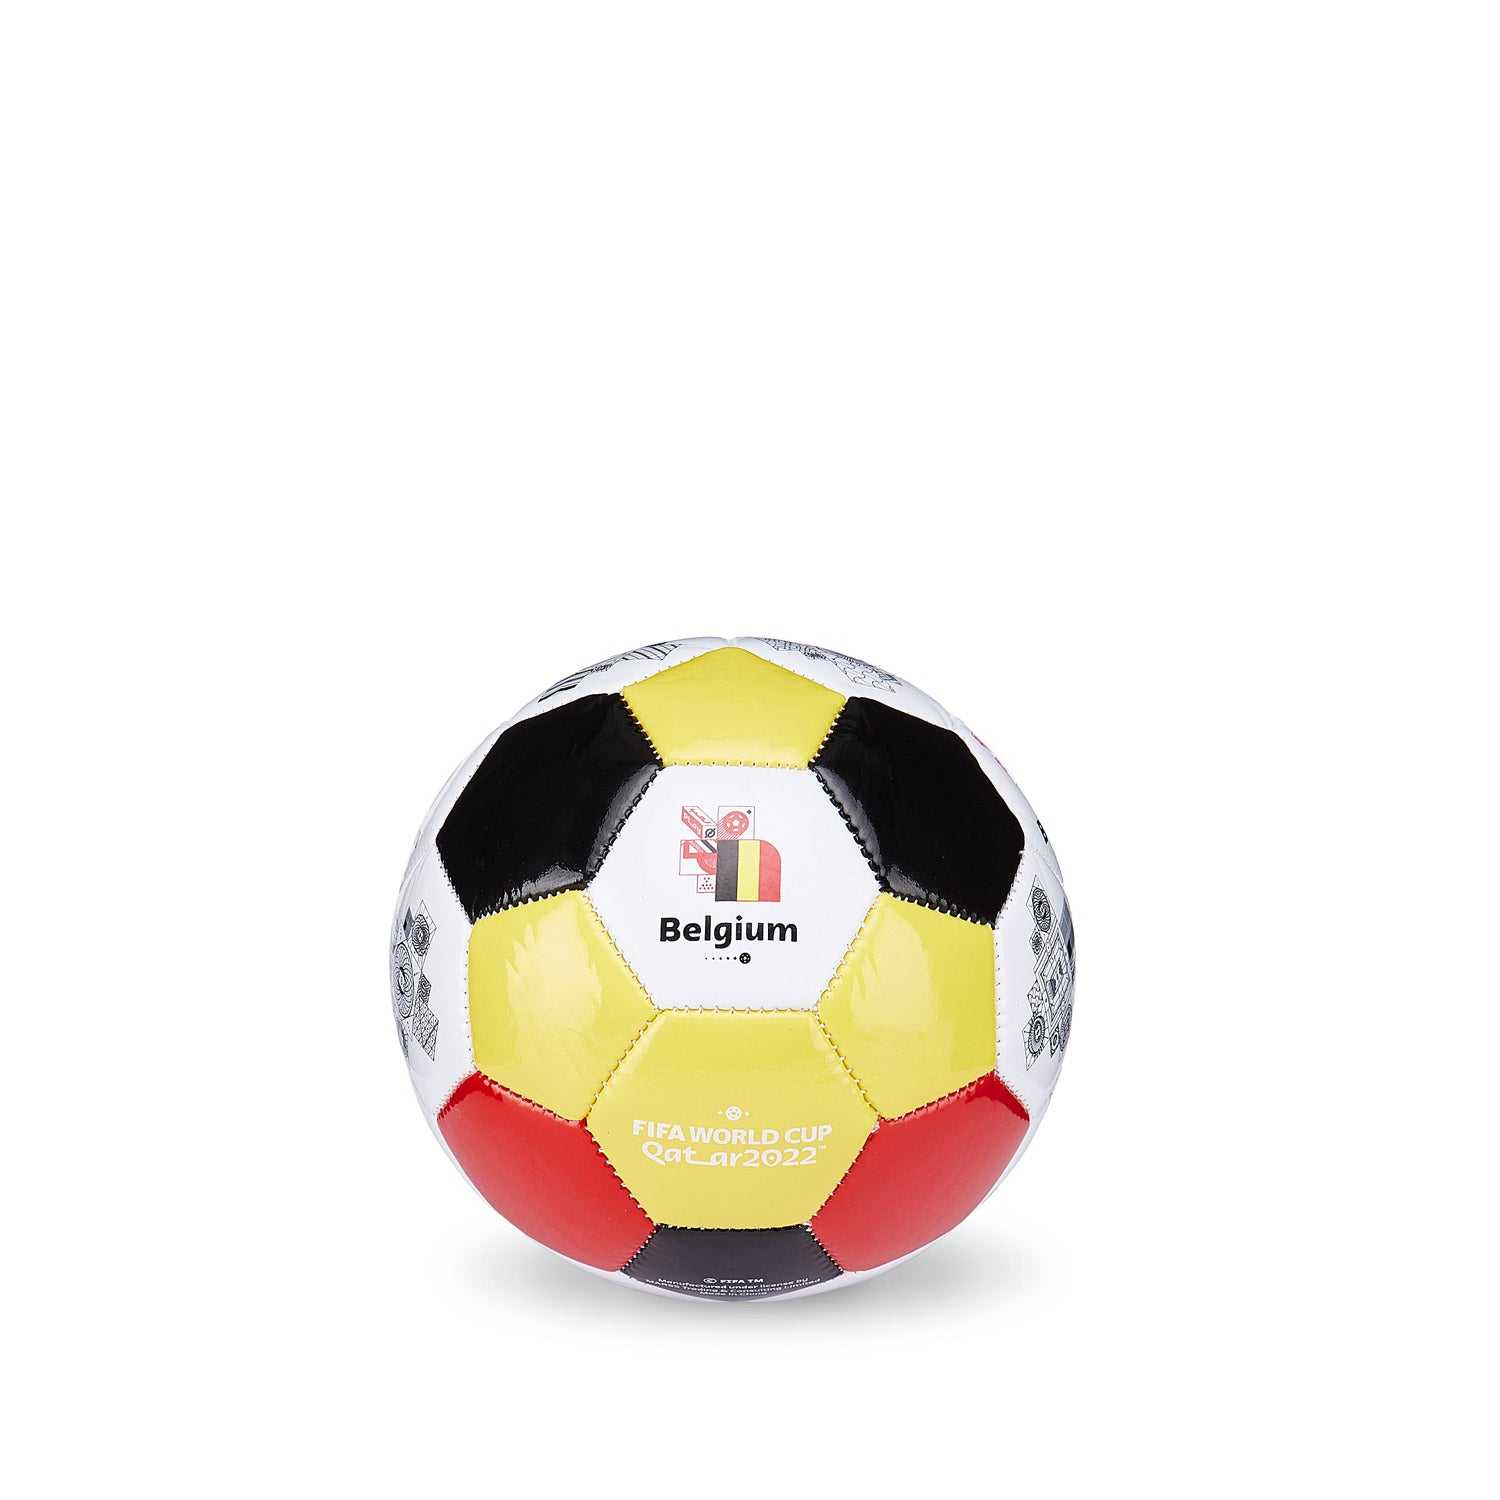 World Cup 2022 Belgium Licensed Ball Size 2